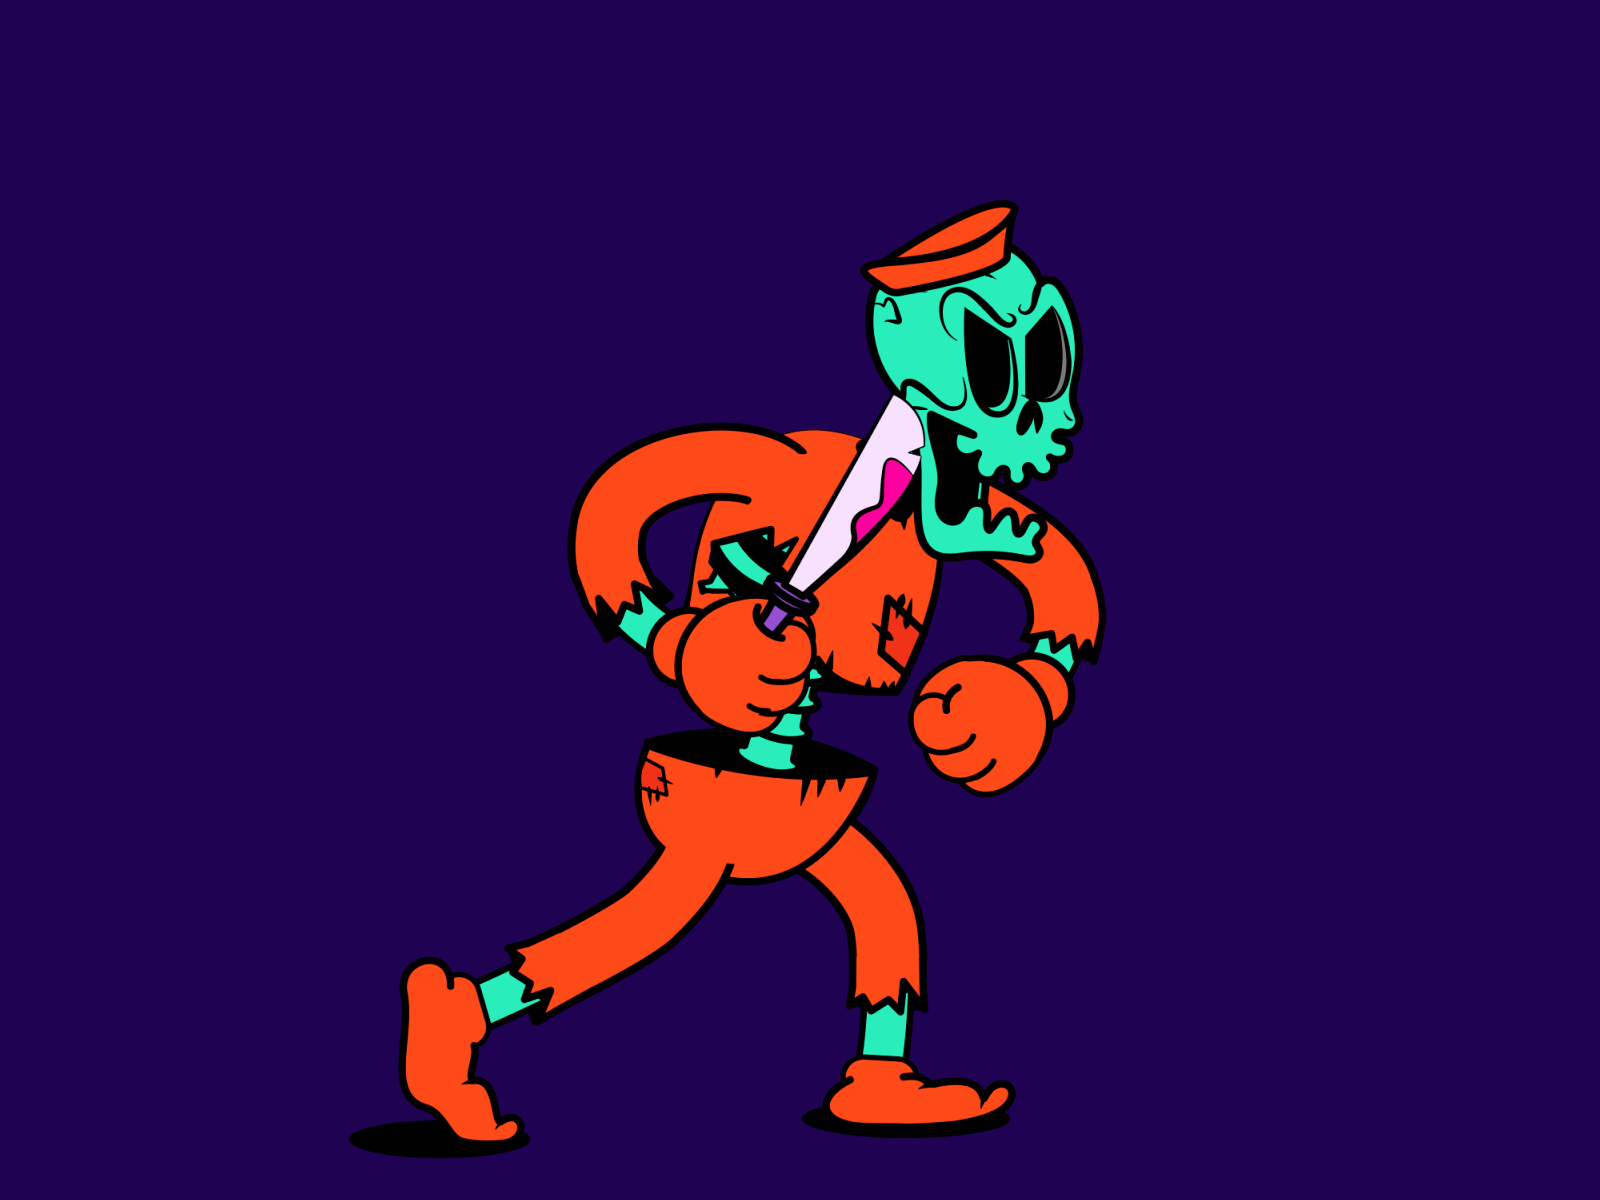 Spooky Angry Skeleton 2d after effects angry animation character design design die framebyframe halloween2022 illustration kill knife motion graphics orange prisoner rubberhose skeleton spooky walk walk cycle